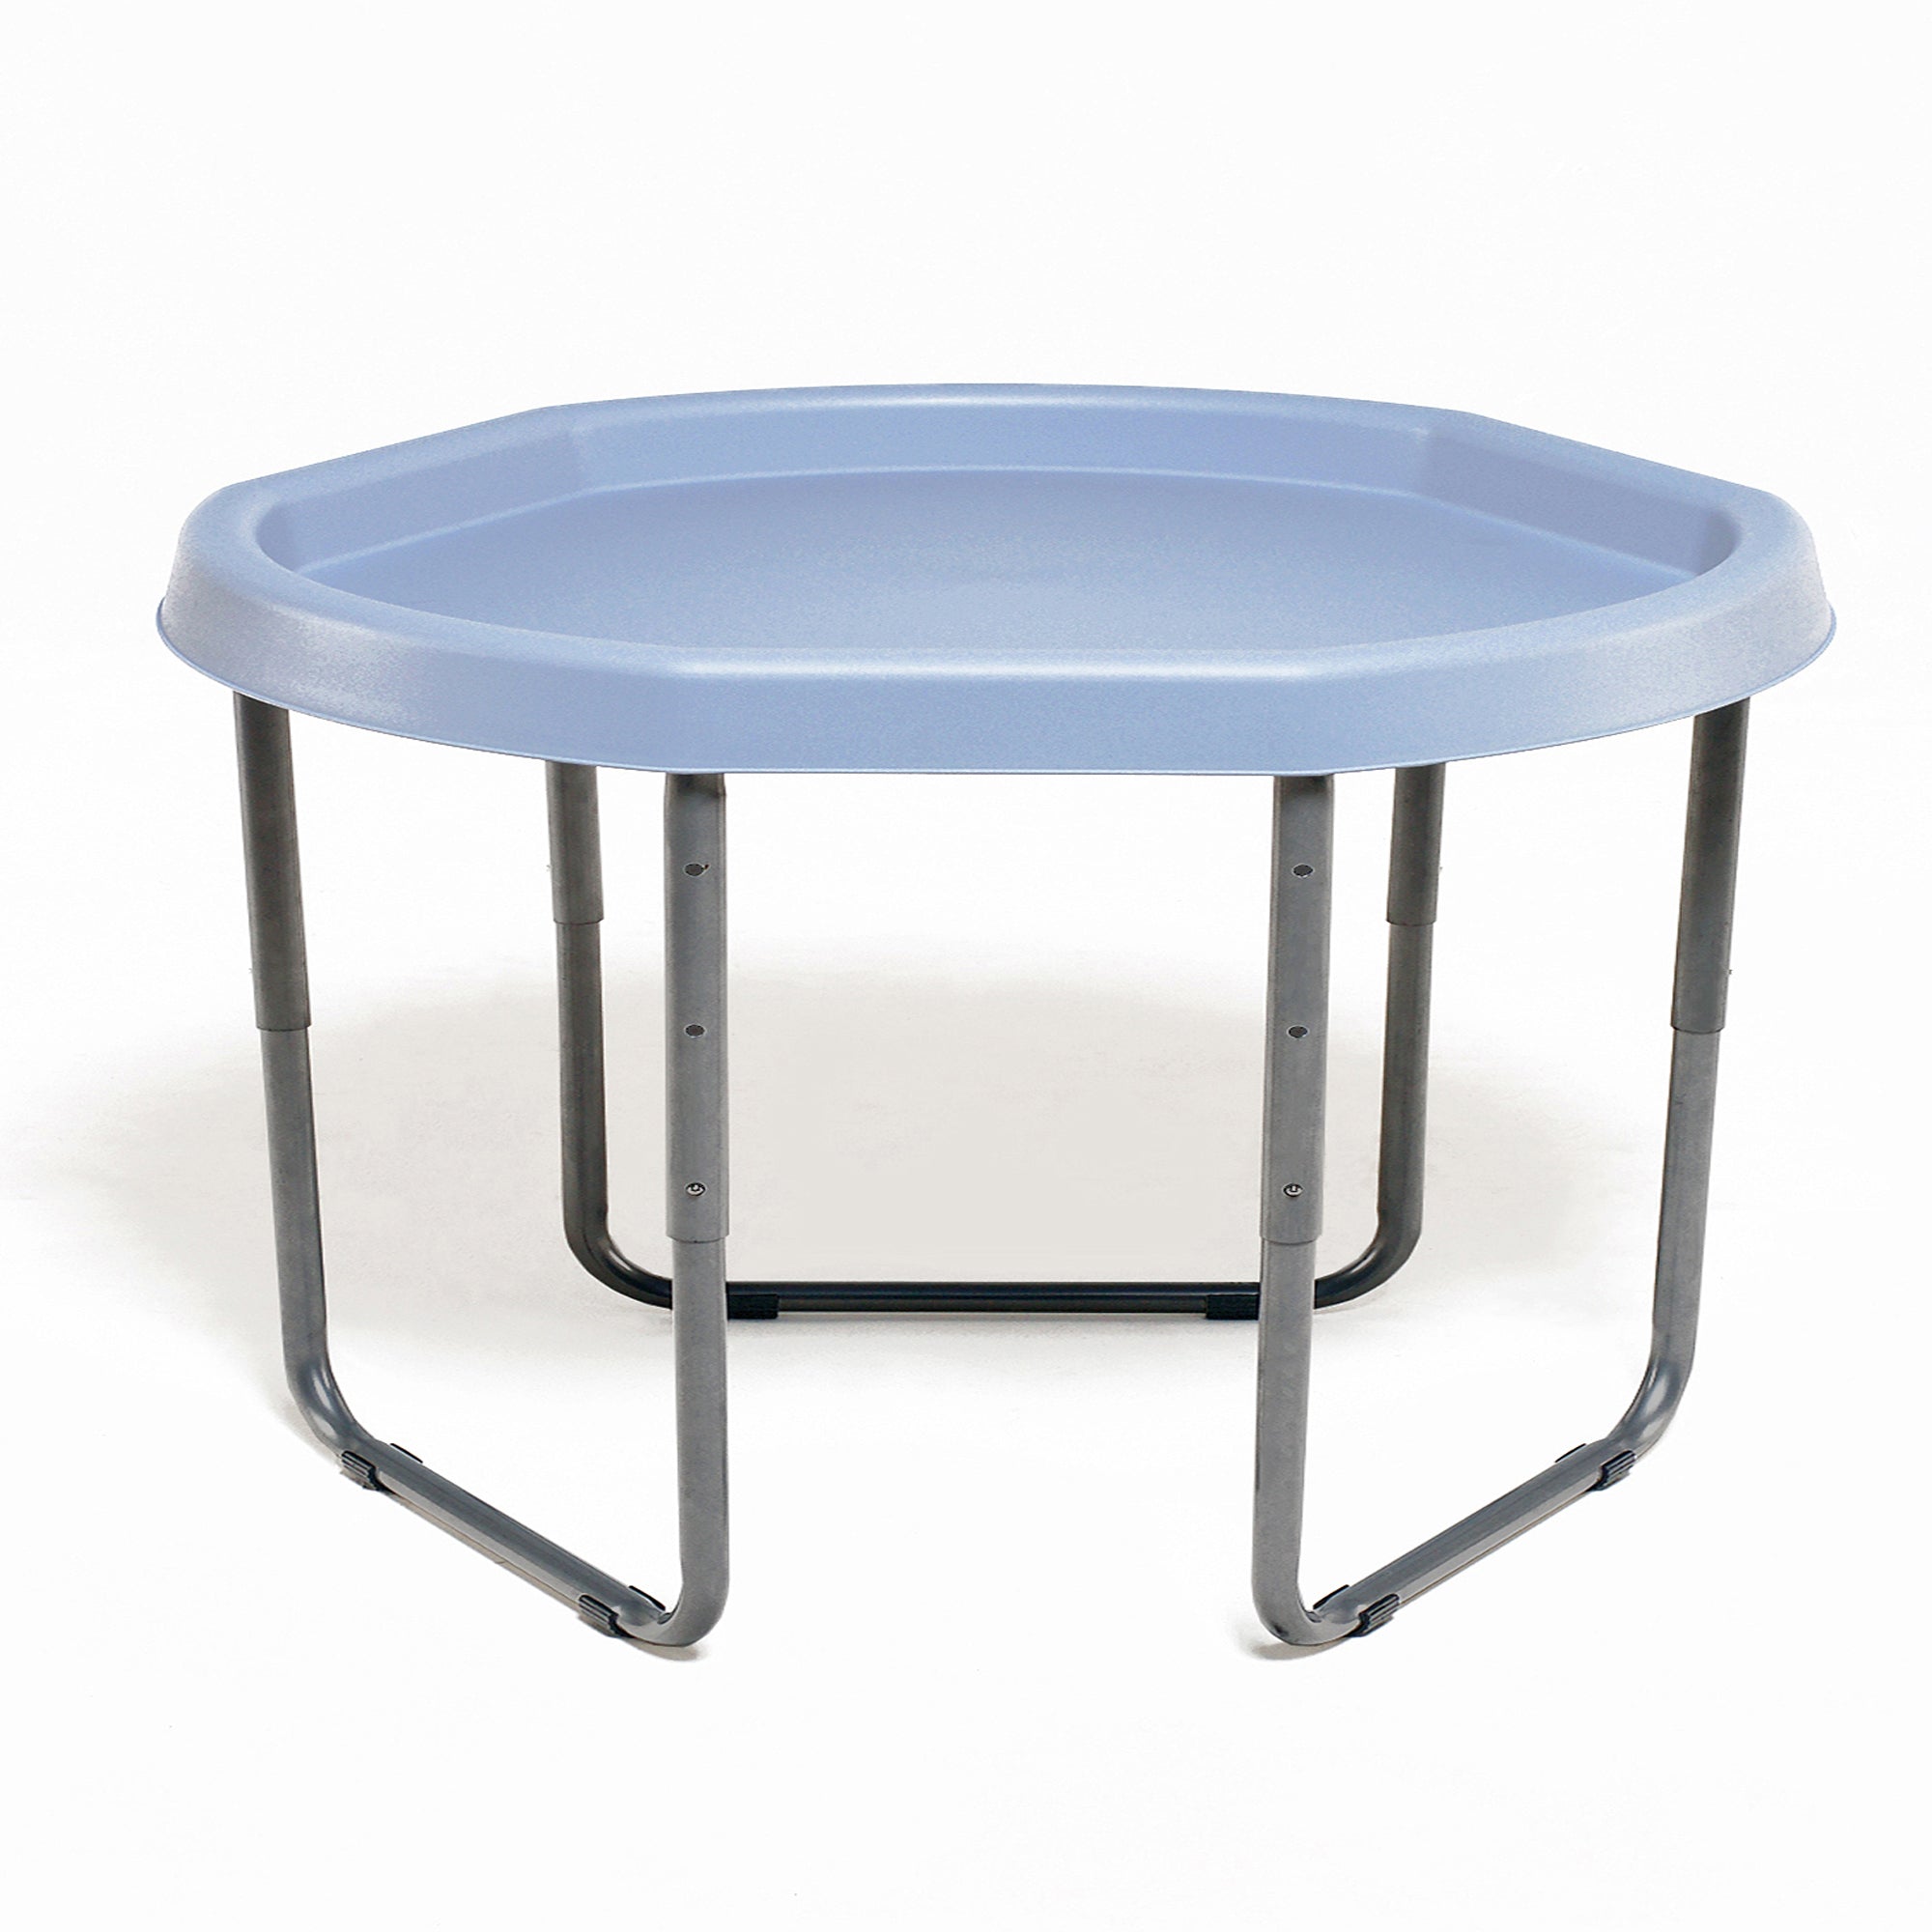 XL Hexacle Tuff Tray & Stand 90cm - 6 Colour Options